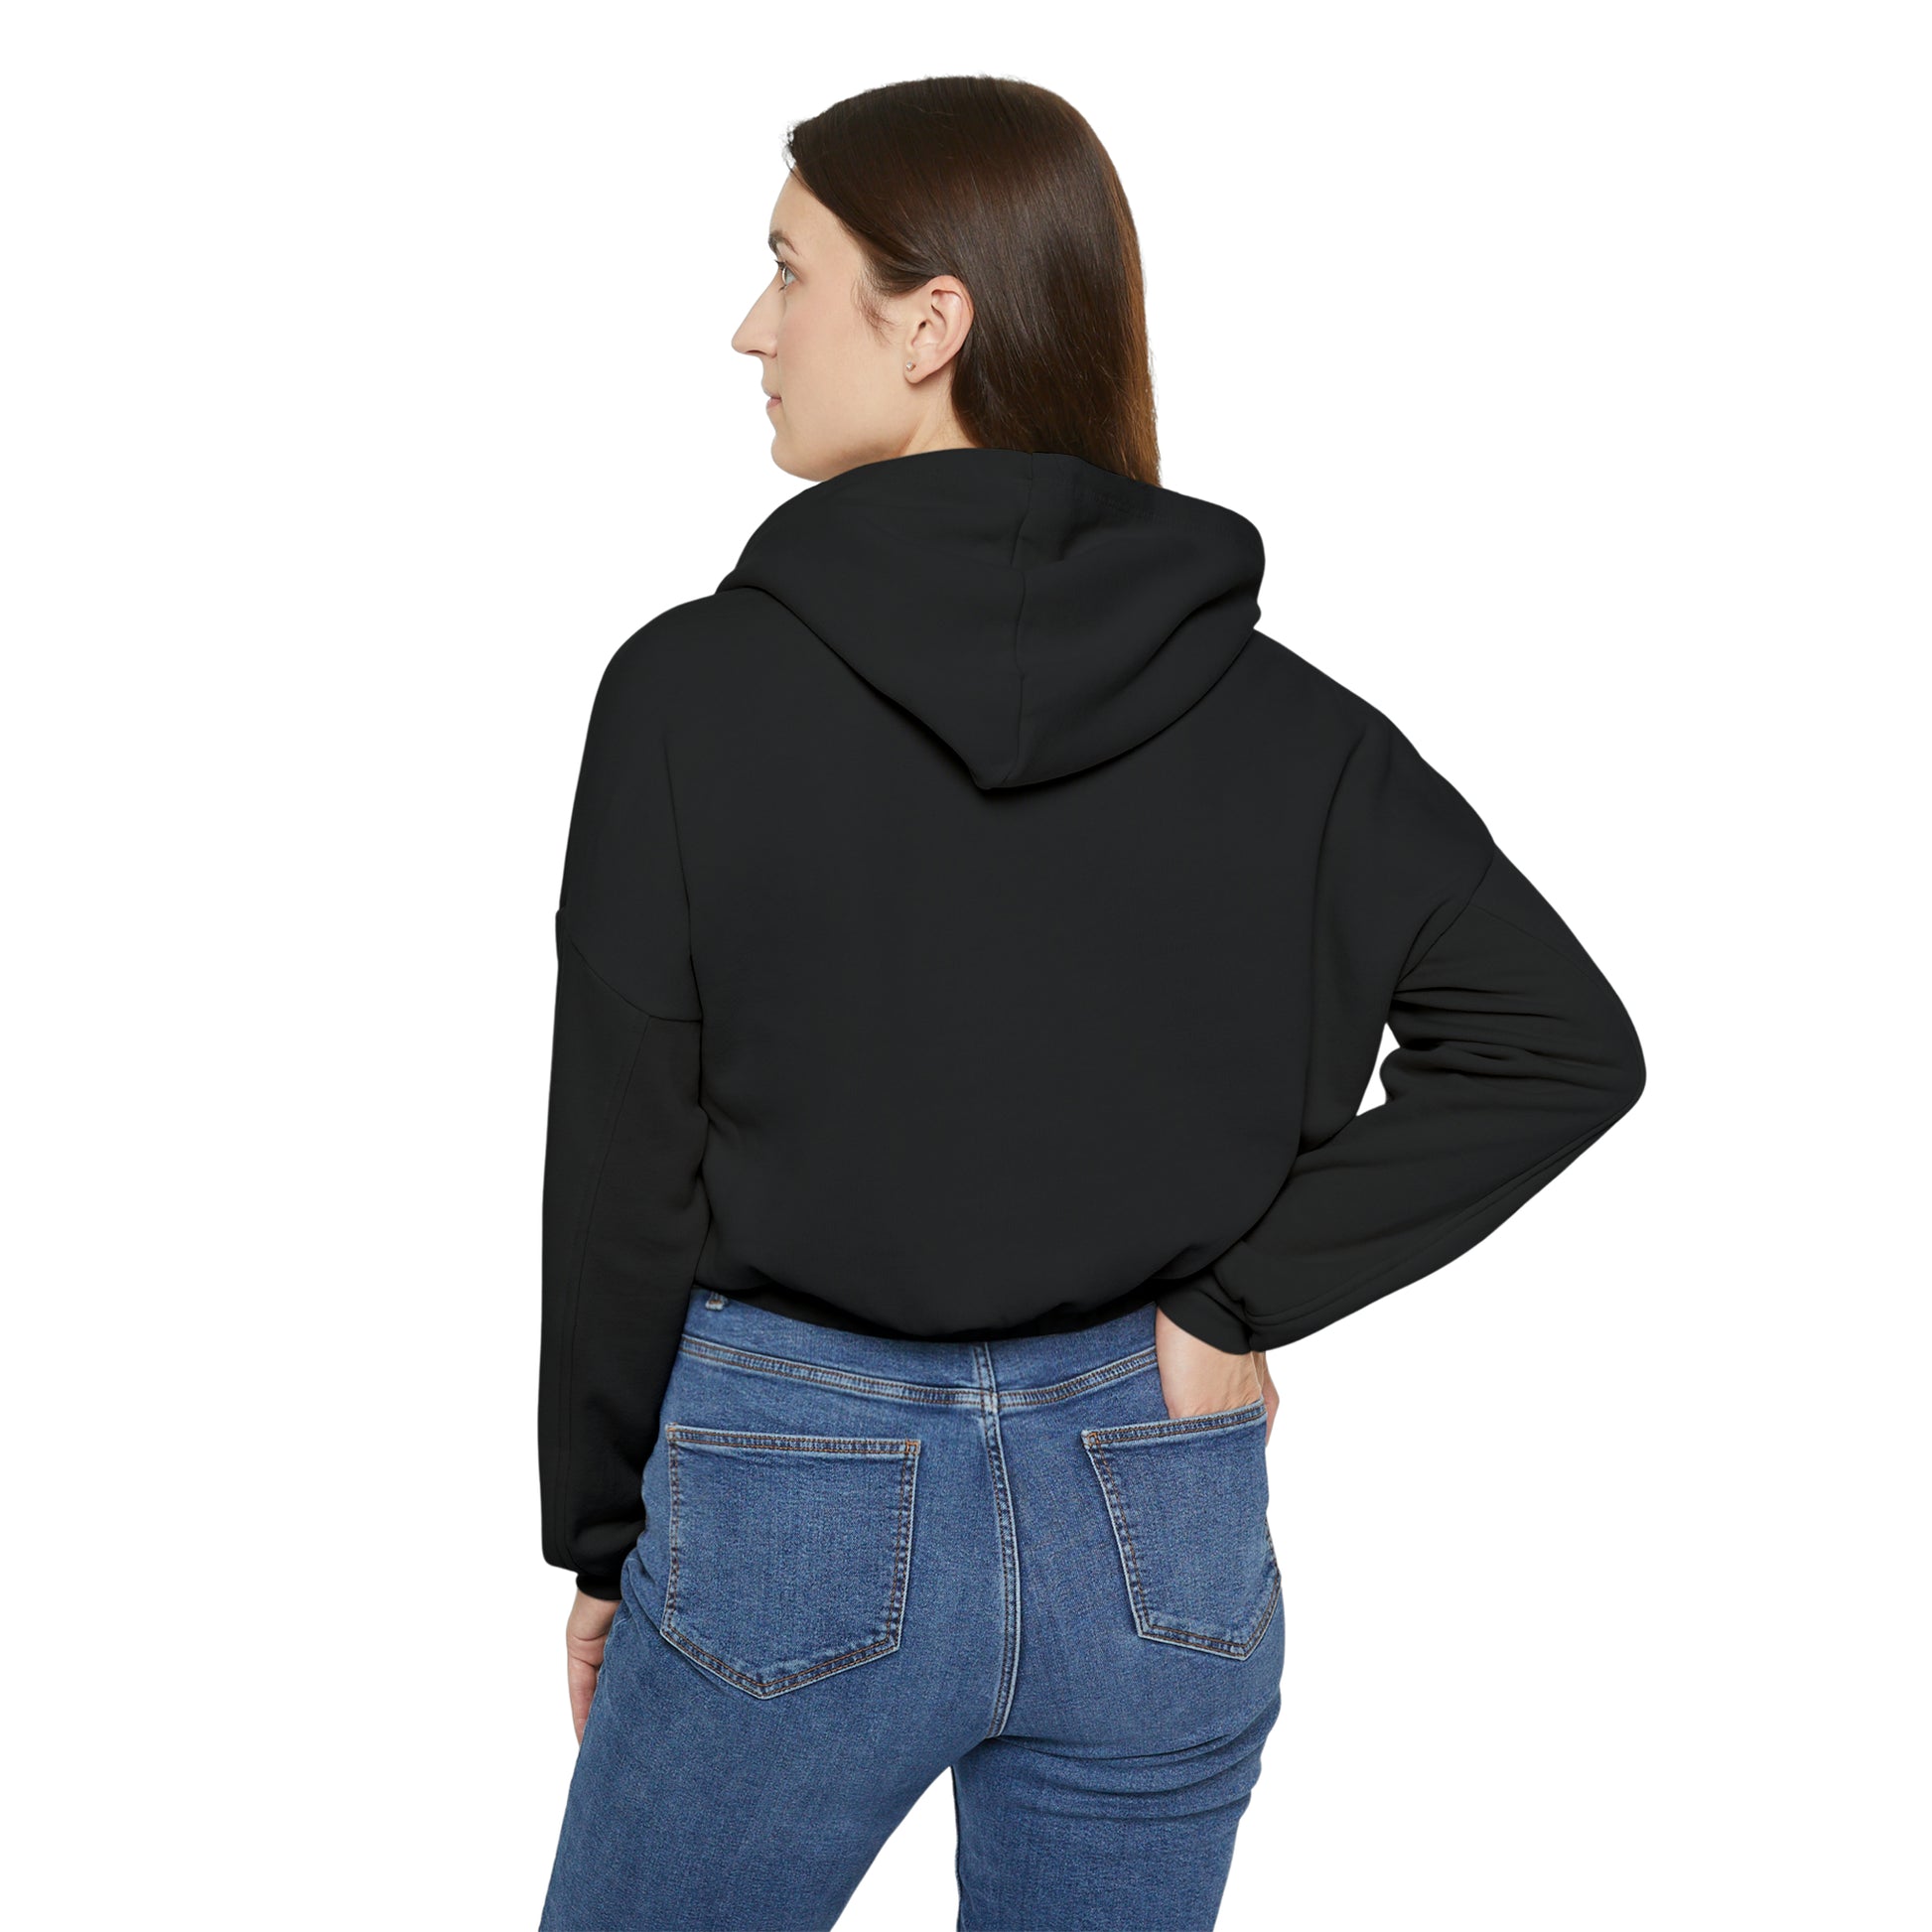 The back view of a woman wearing a black Bella + Canvas women's cinched-bottom hoodie and jeans from Printify.